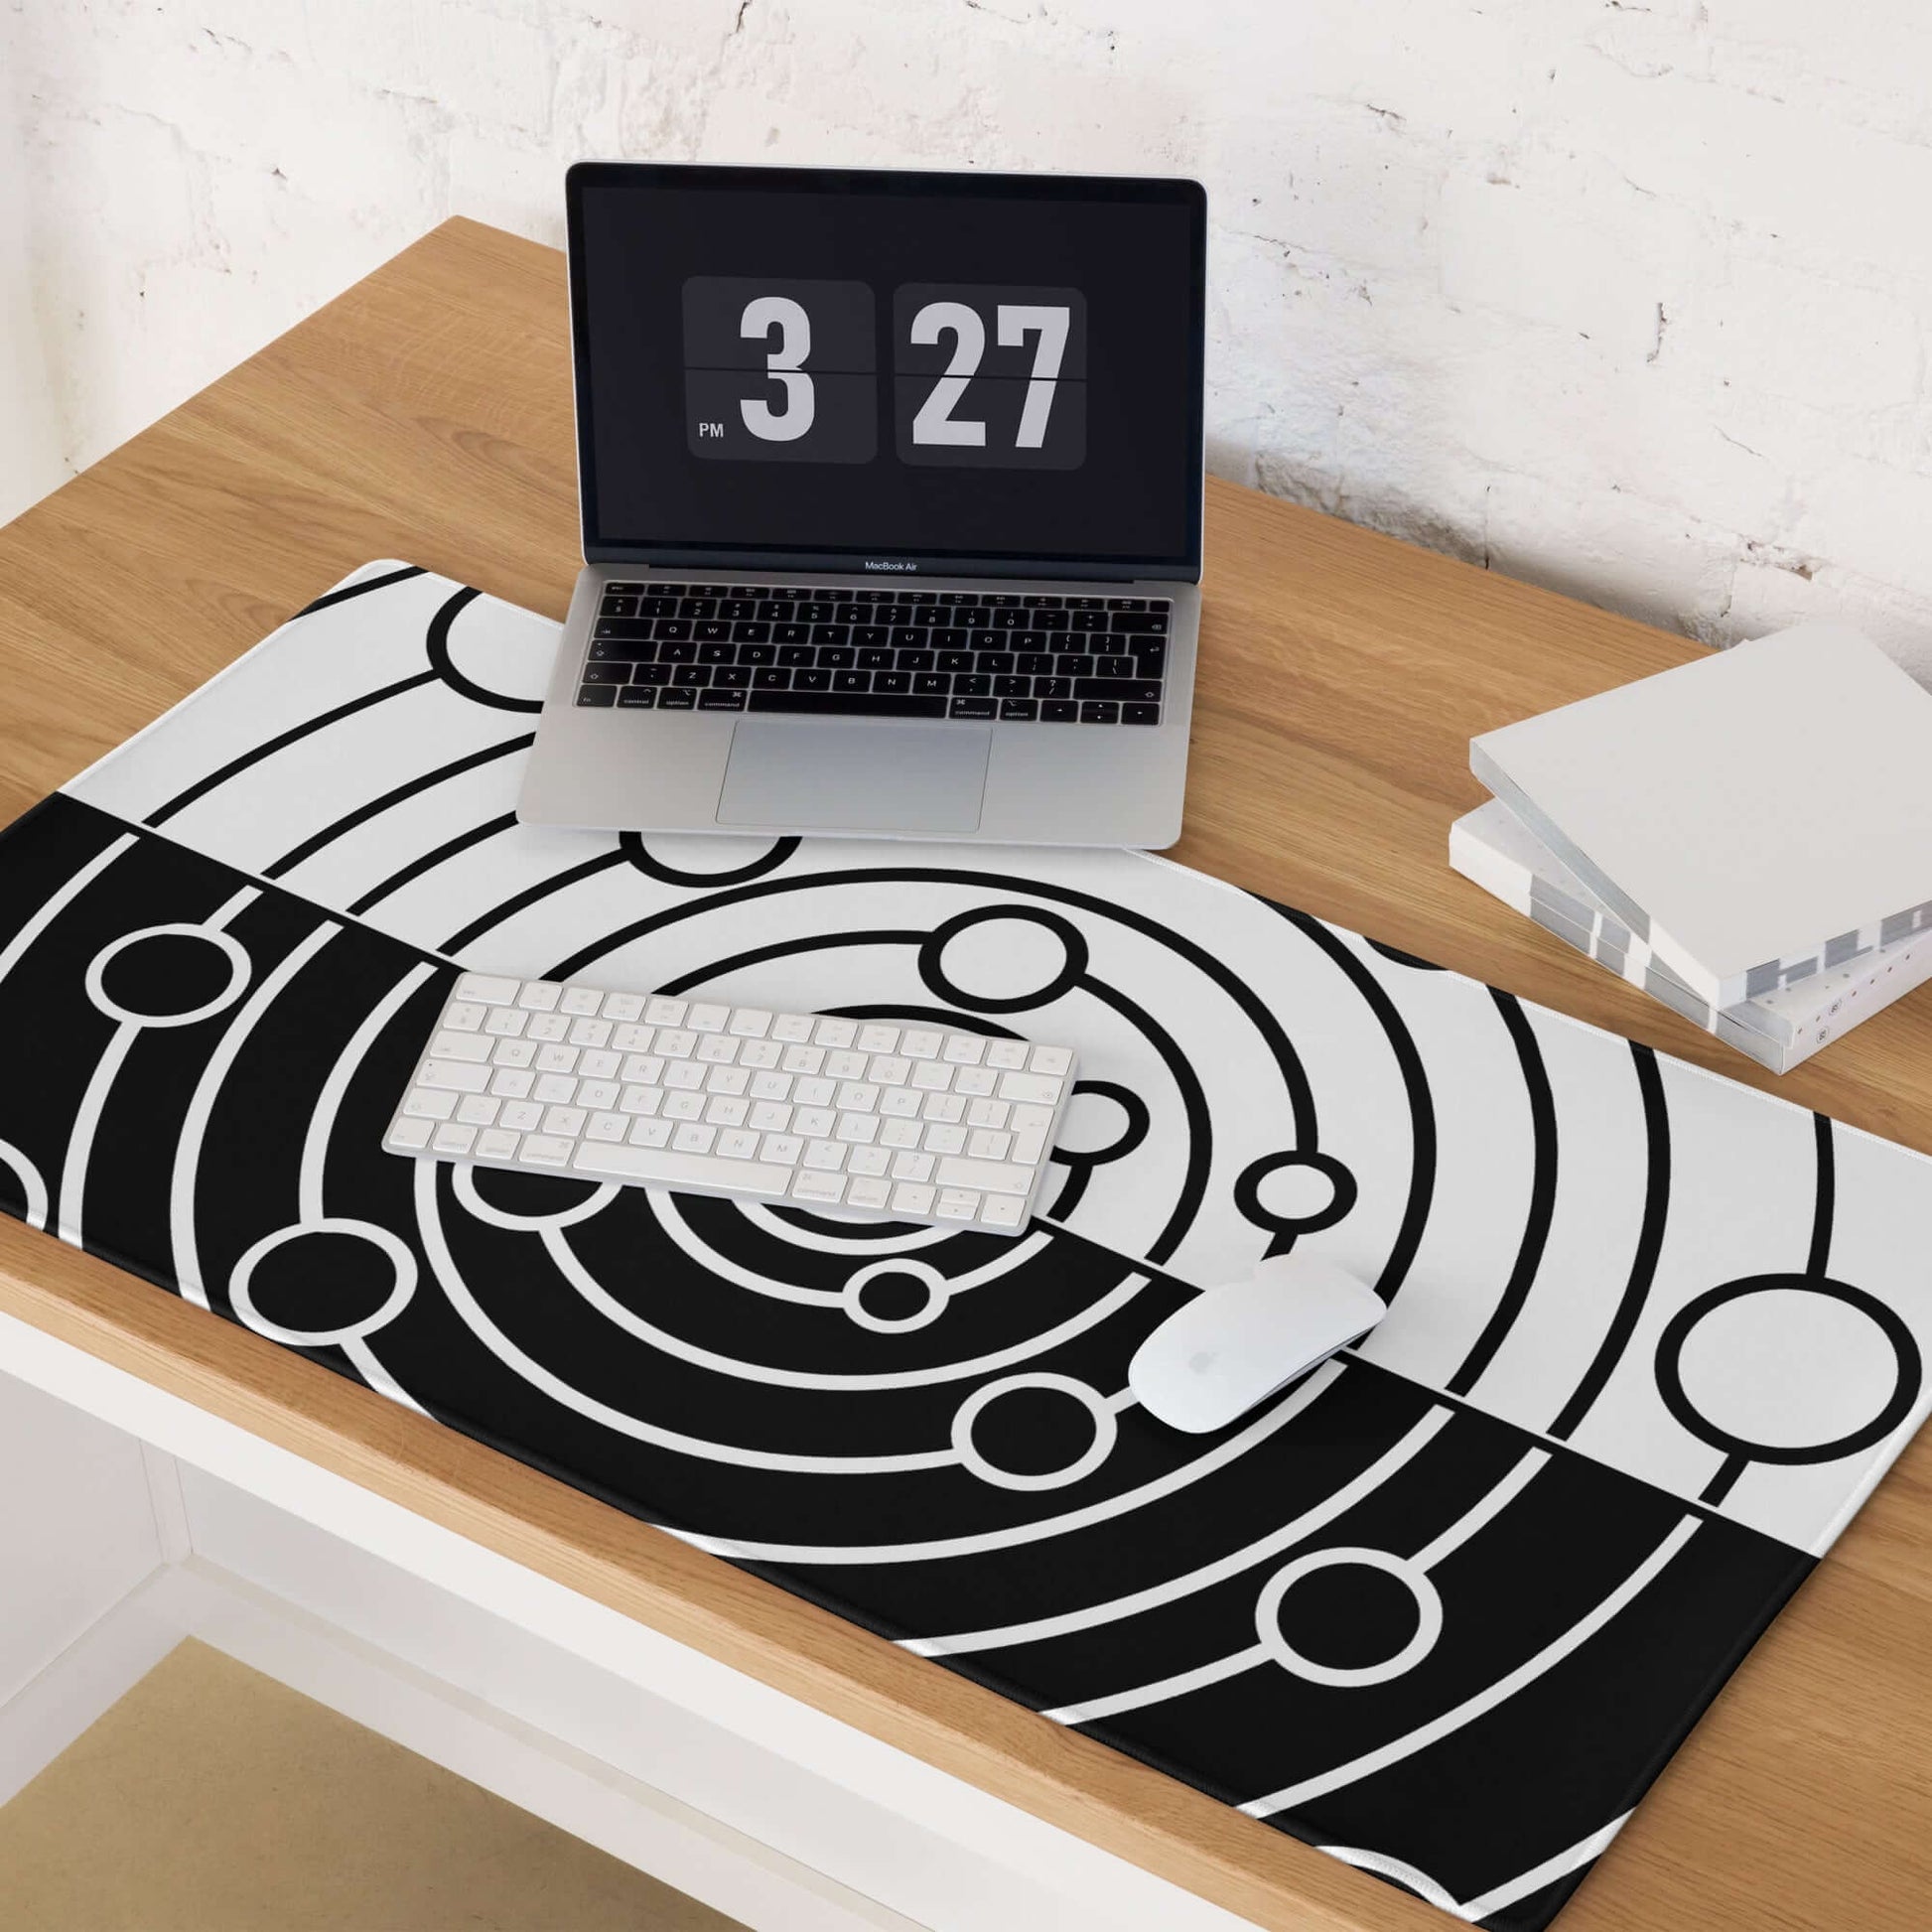 large-mouse-pad